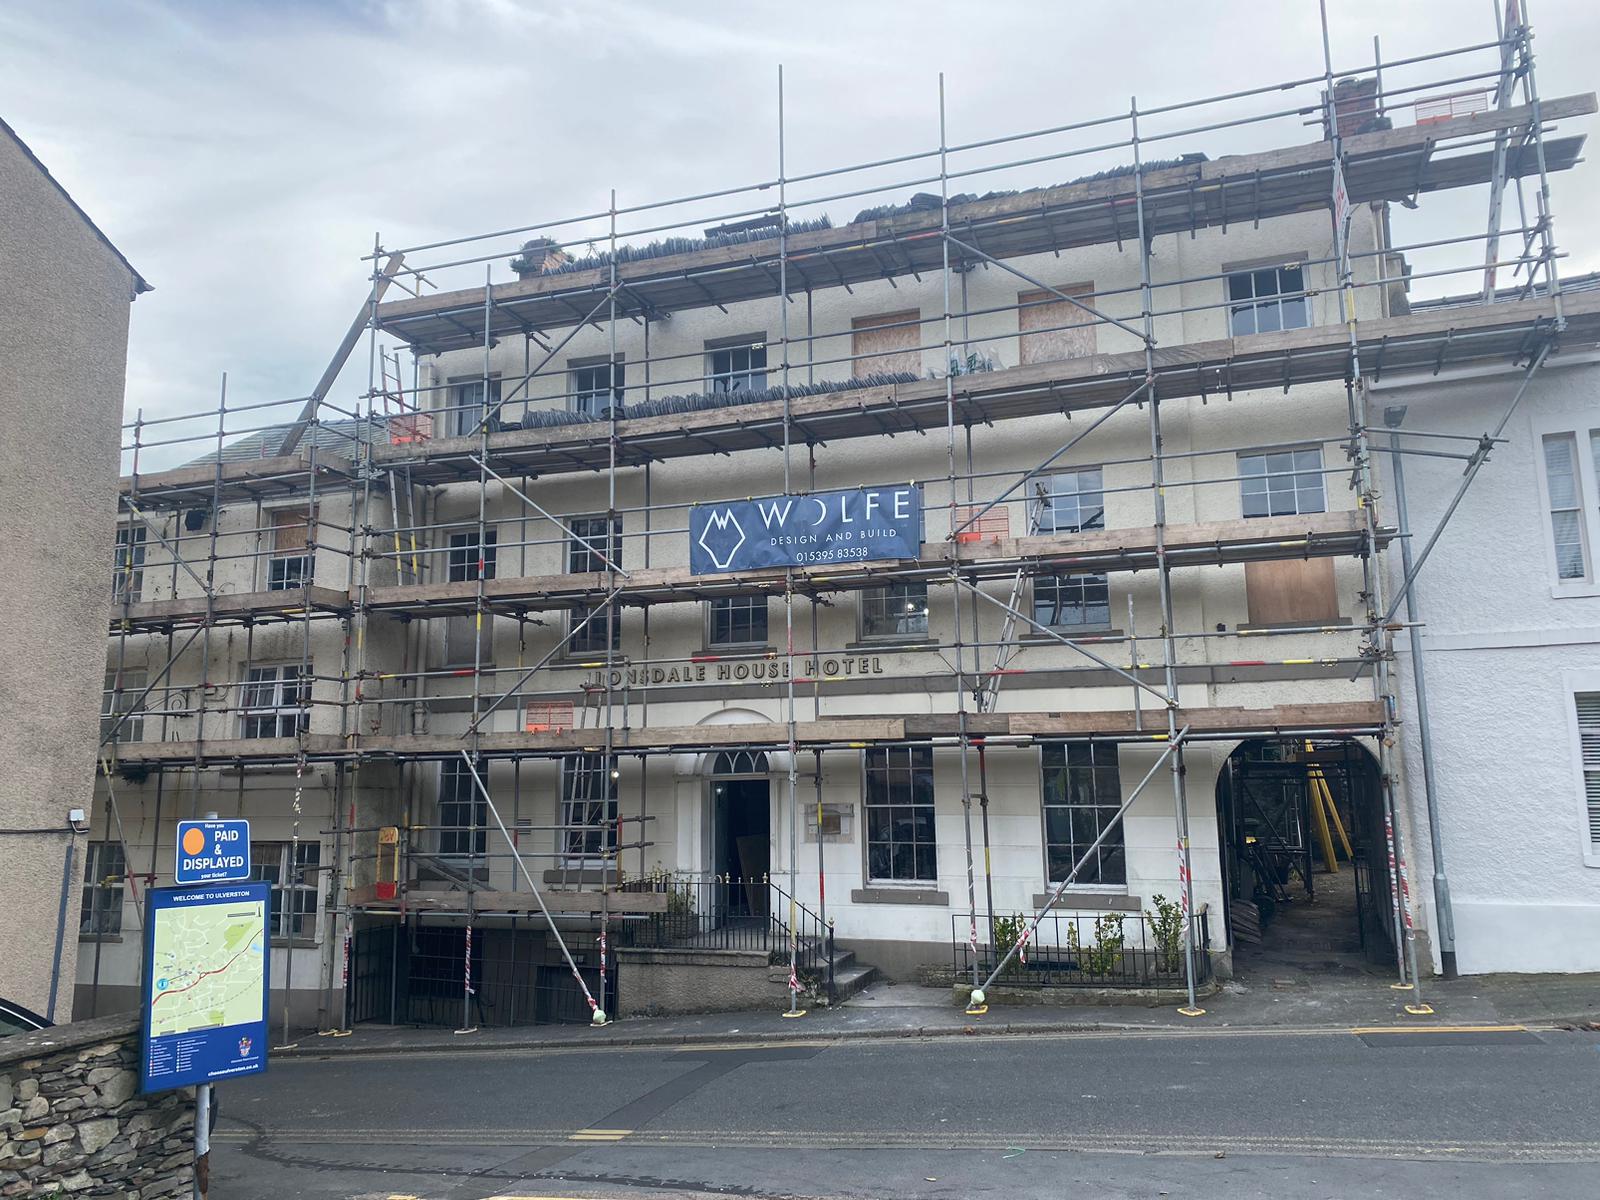 Hotel and Pub renovation as part of a commercial building project in Cumbria, The Lake District